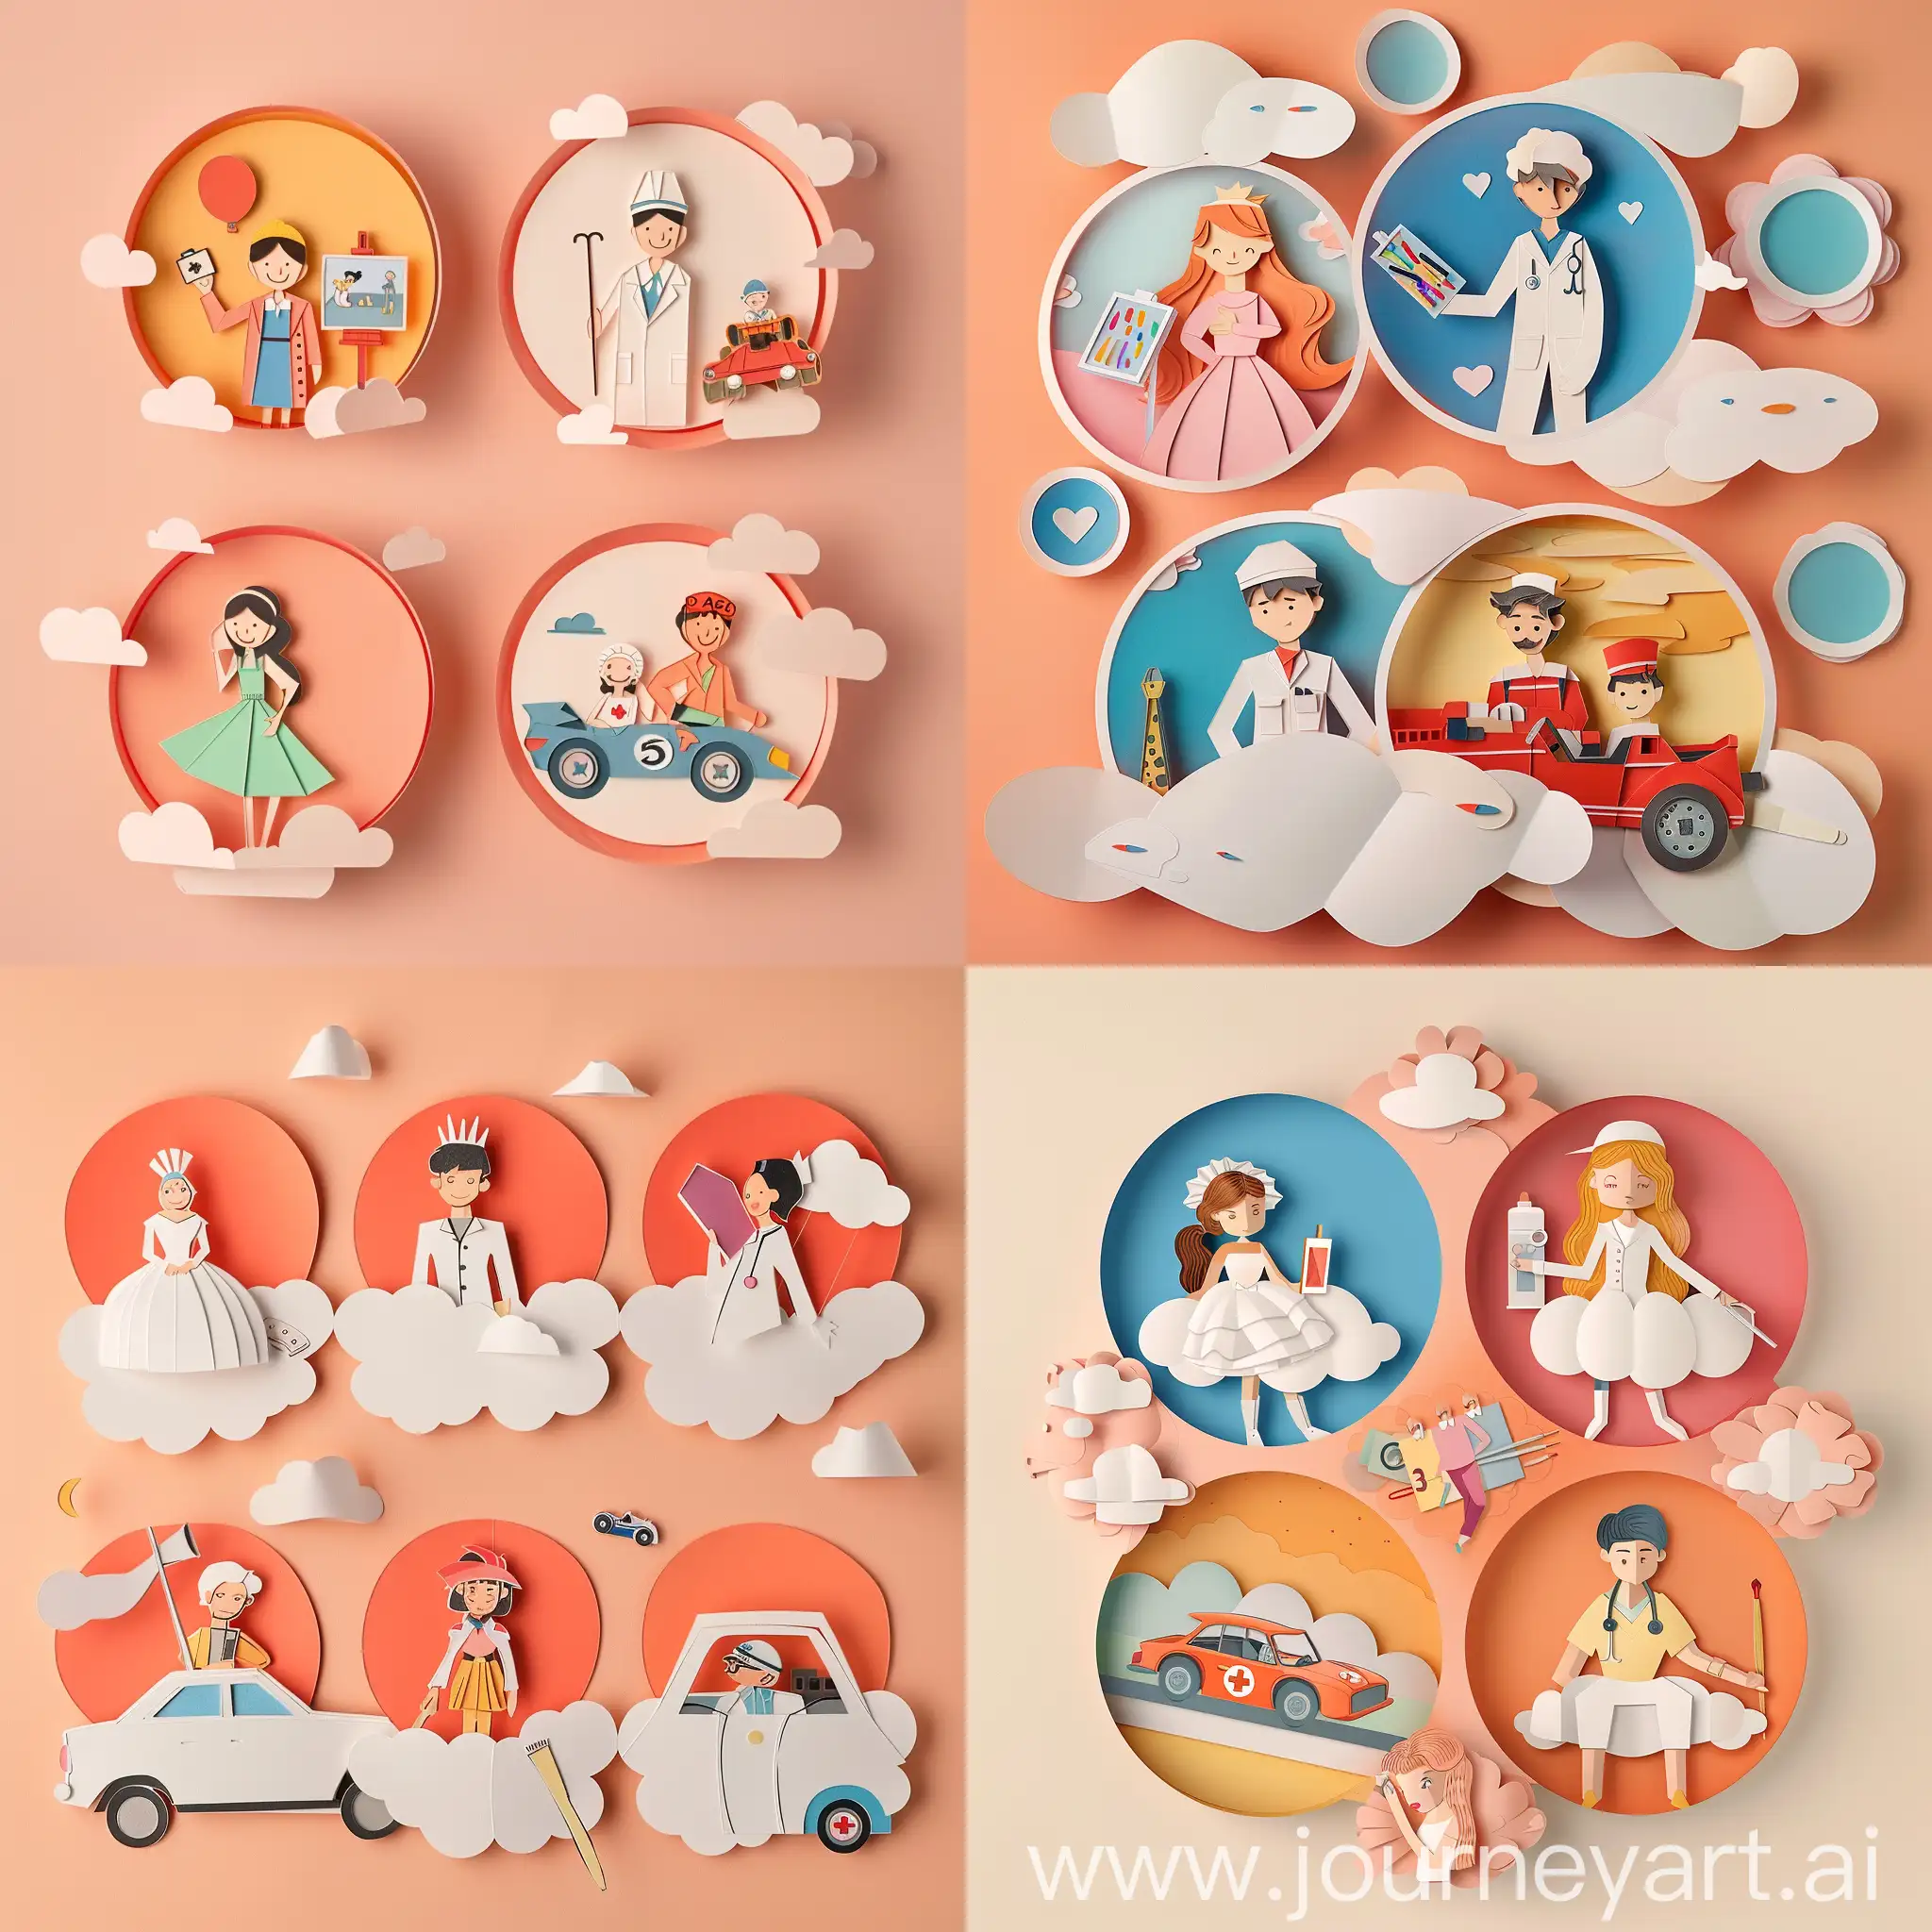 Create papercut art featuring four 3D cartoon thinking bubbles, with a simplistic painter, princess, doctor, and race car driver in each bubble, under a peachy sky